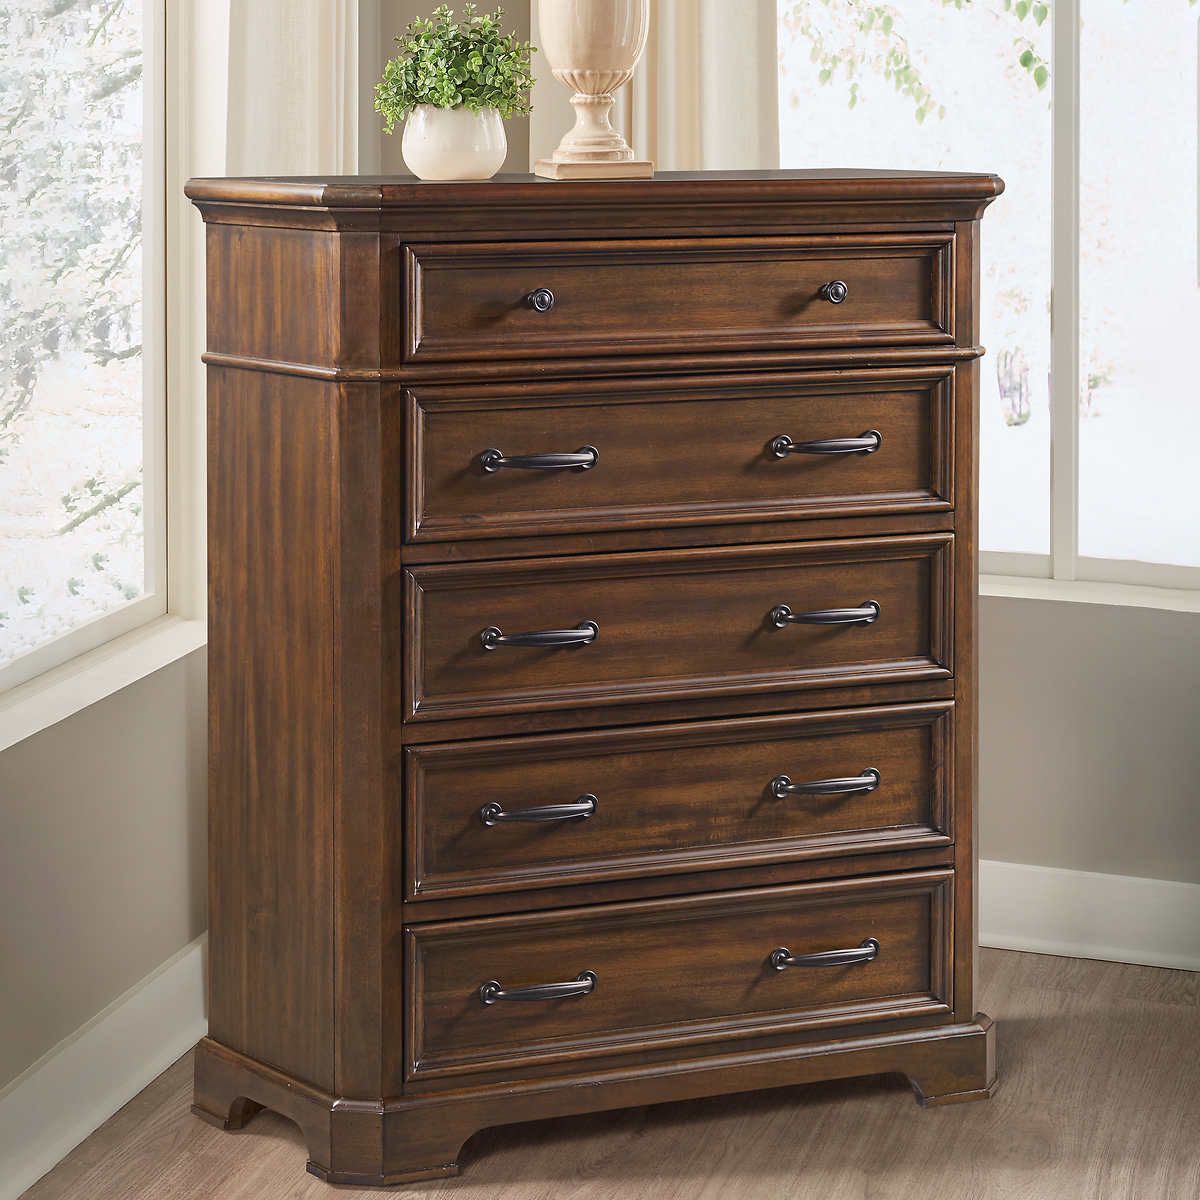 Free Delivery Brand New in Box Catalina Creek 5-Drawer Chest Dresser in ...